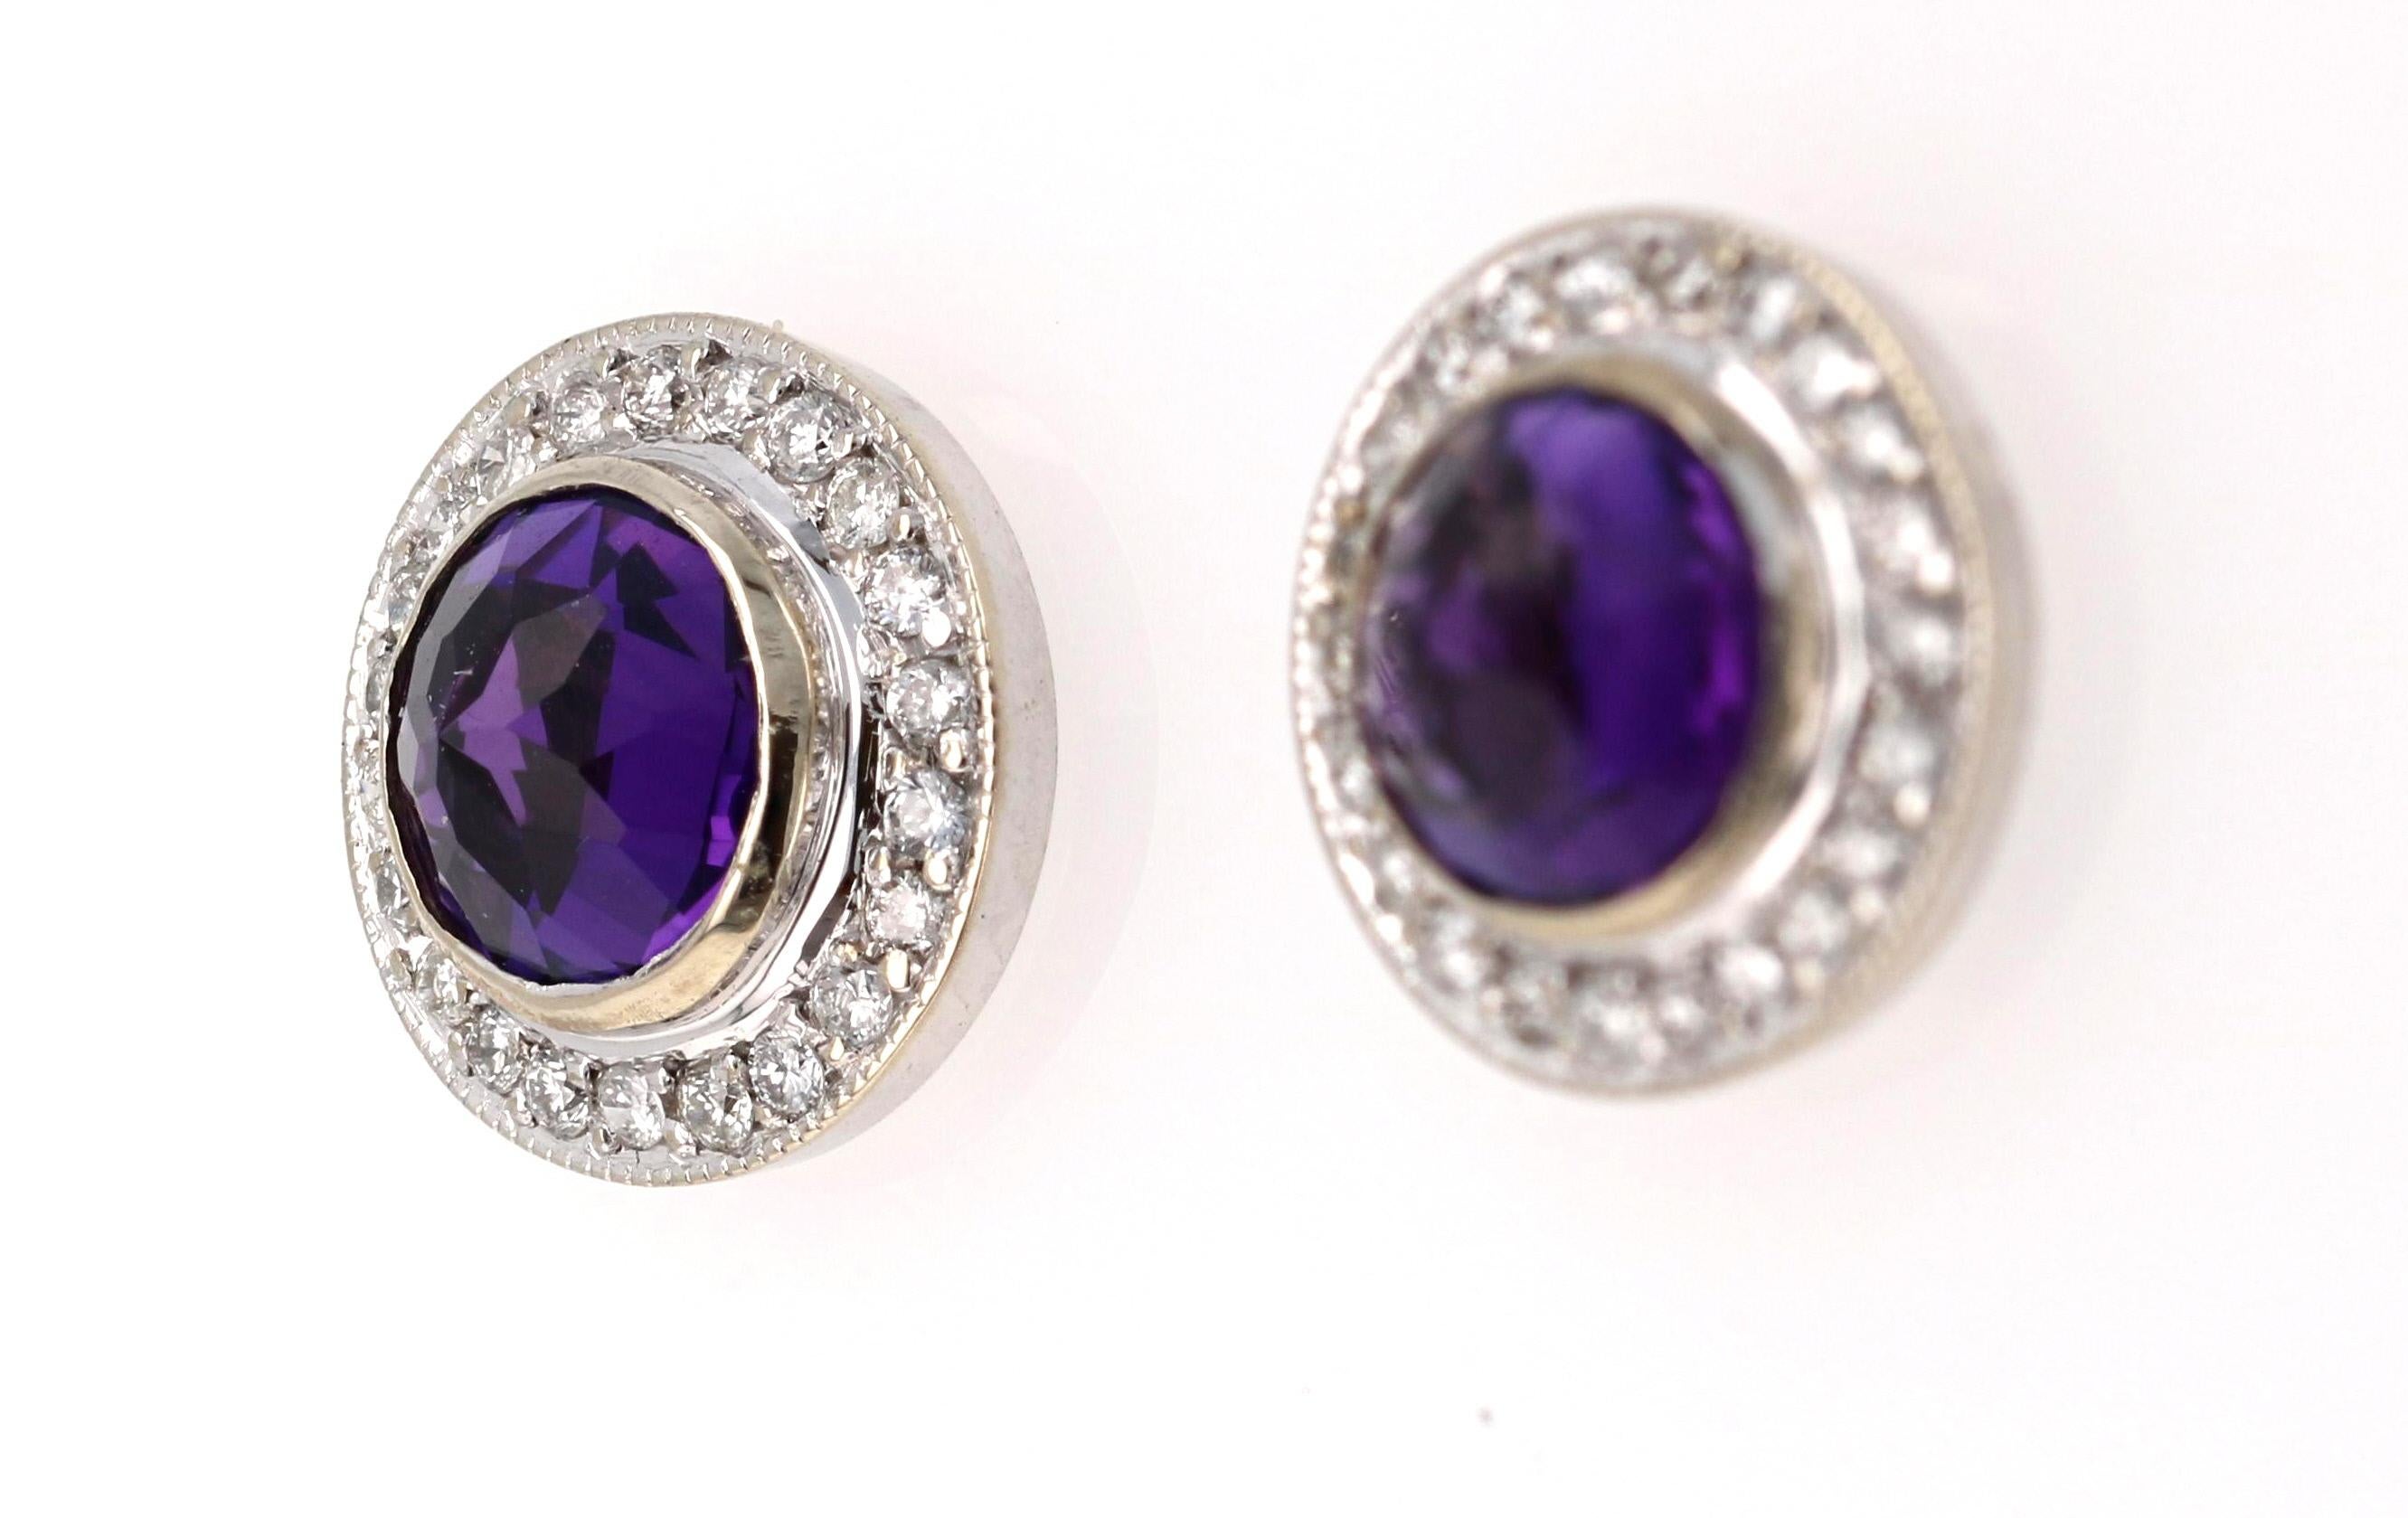 A cute and dainty pair of Amethyst Earrings accented with some Diamonds!

These cute studs have 2 Round Cut Amethyst stones that weigh 1.54 Carats and are surrounded by a beautiful halo of 46 Round Cut Diamonds that weigh 0.30 Carats. (Clarity: SI,